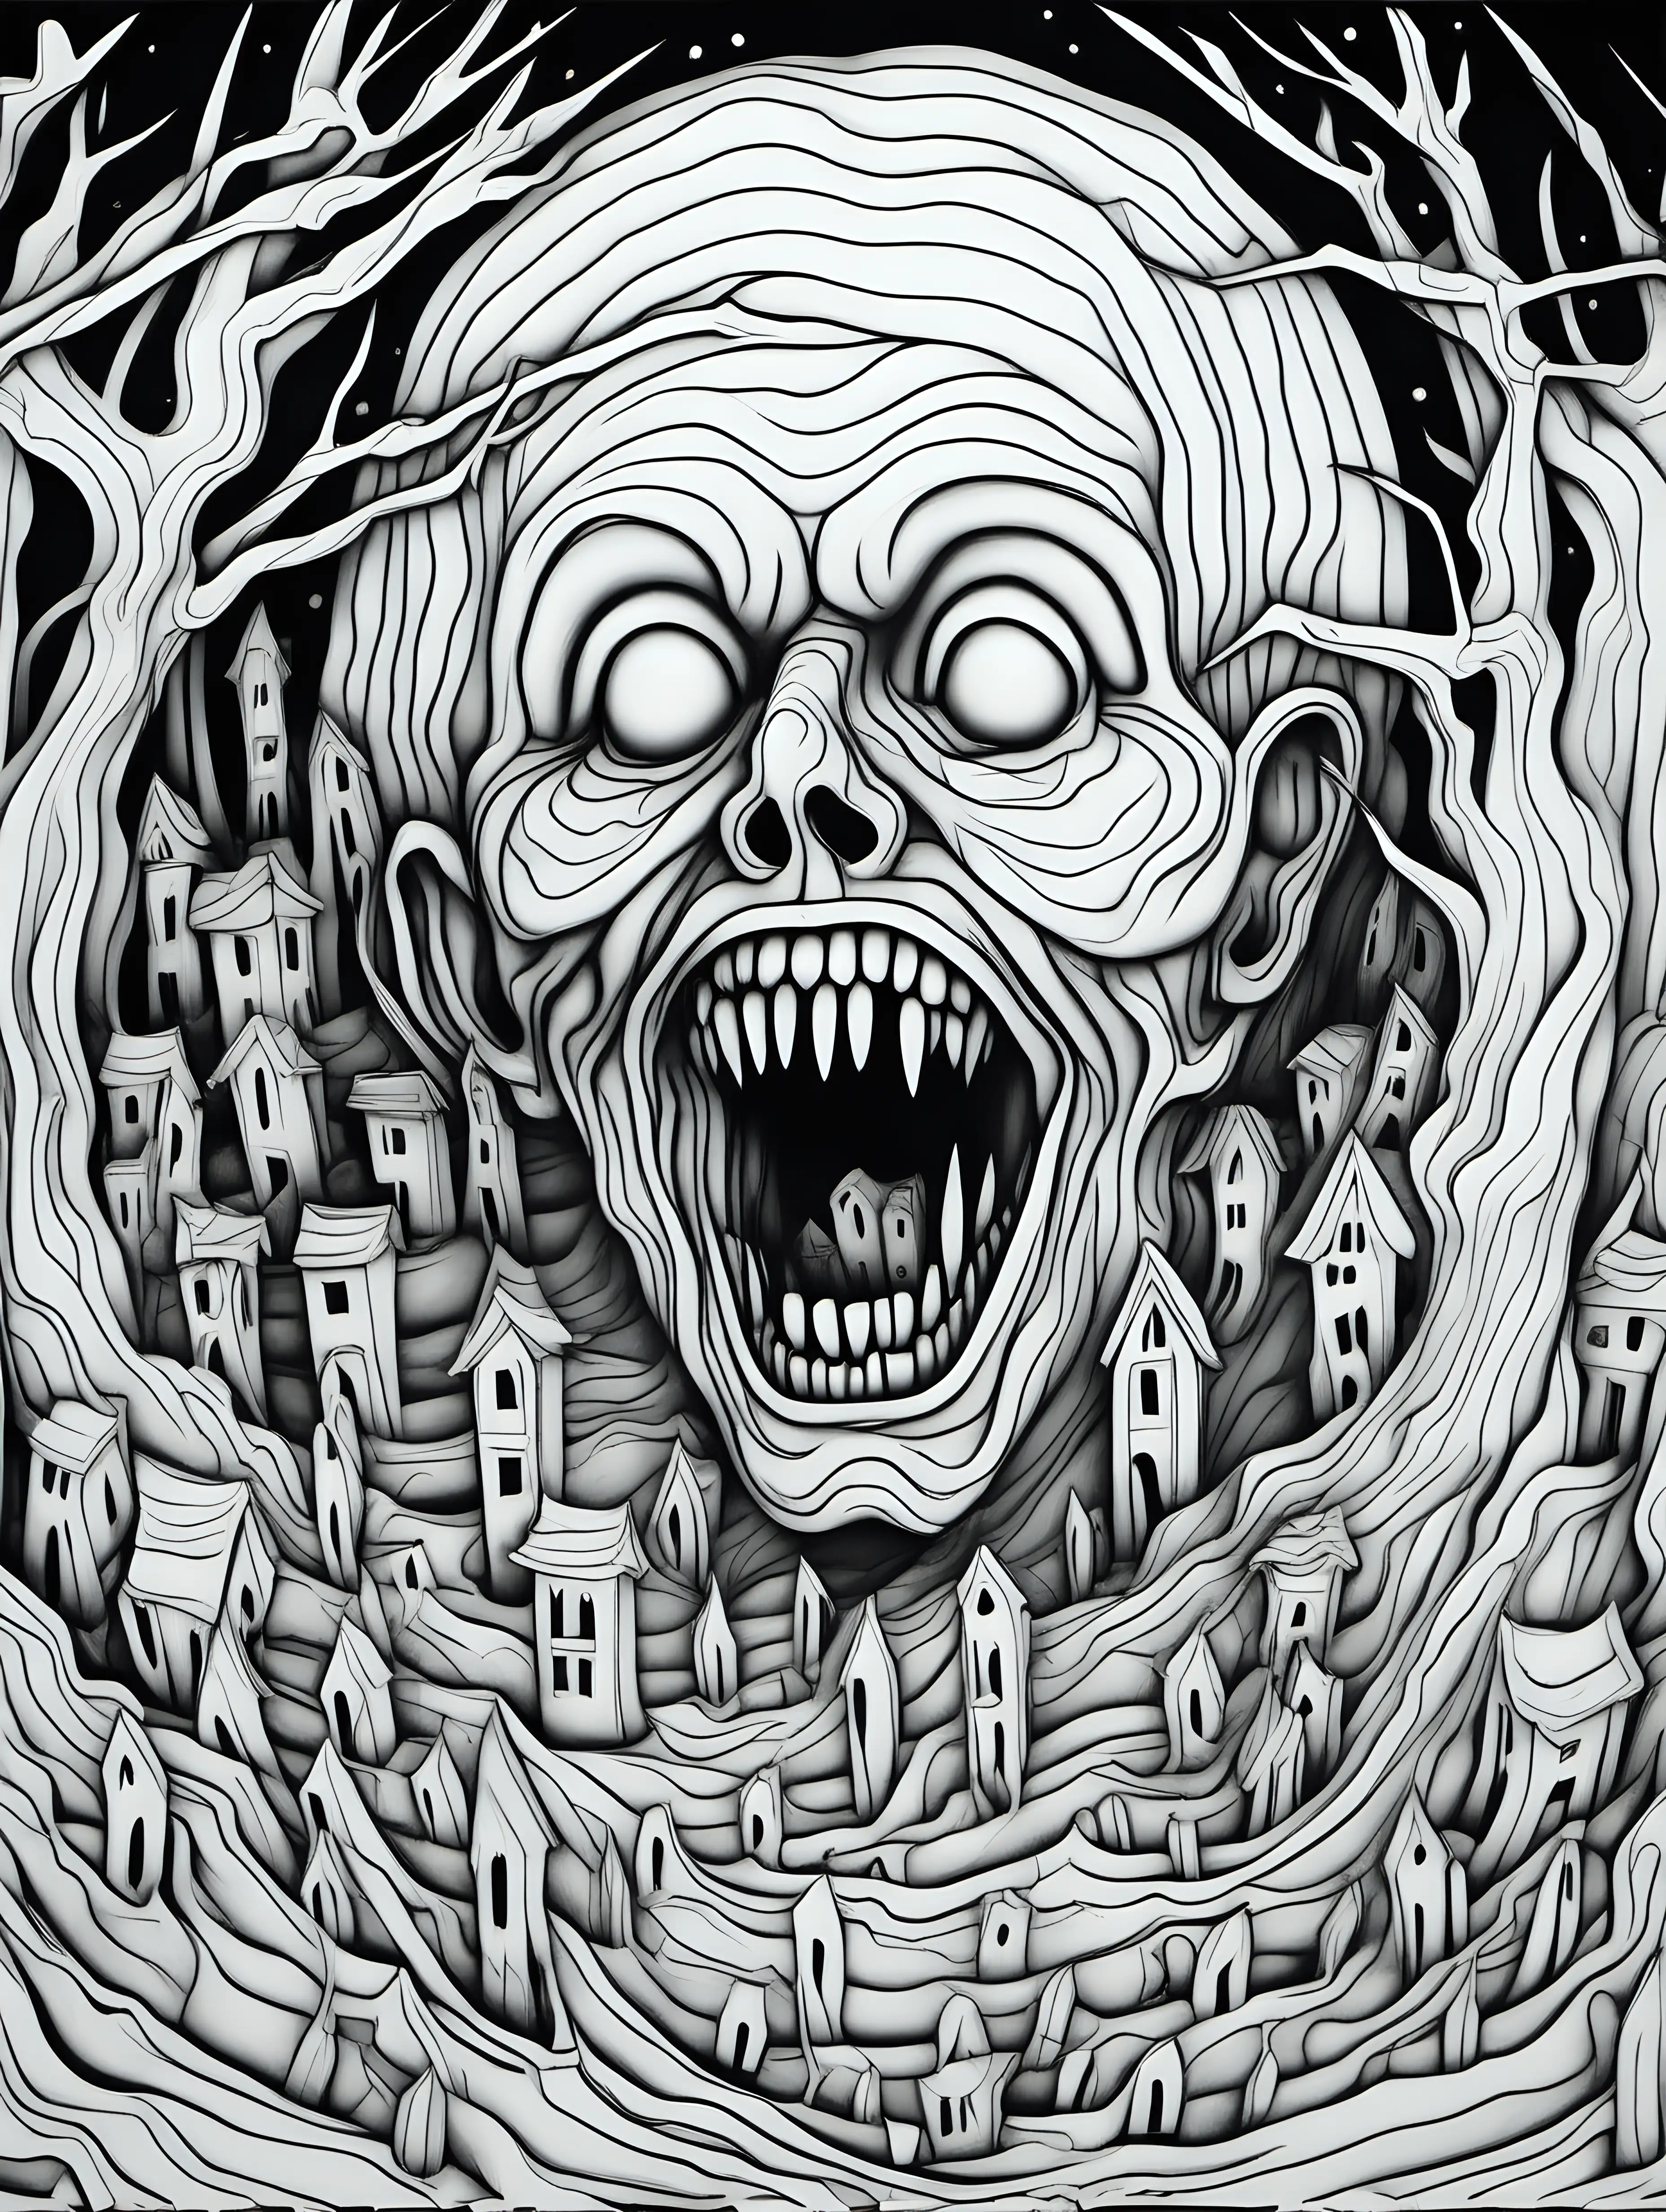 3d coloring page for adults, creepy scary horror, thick black lines
 

